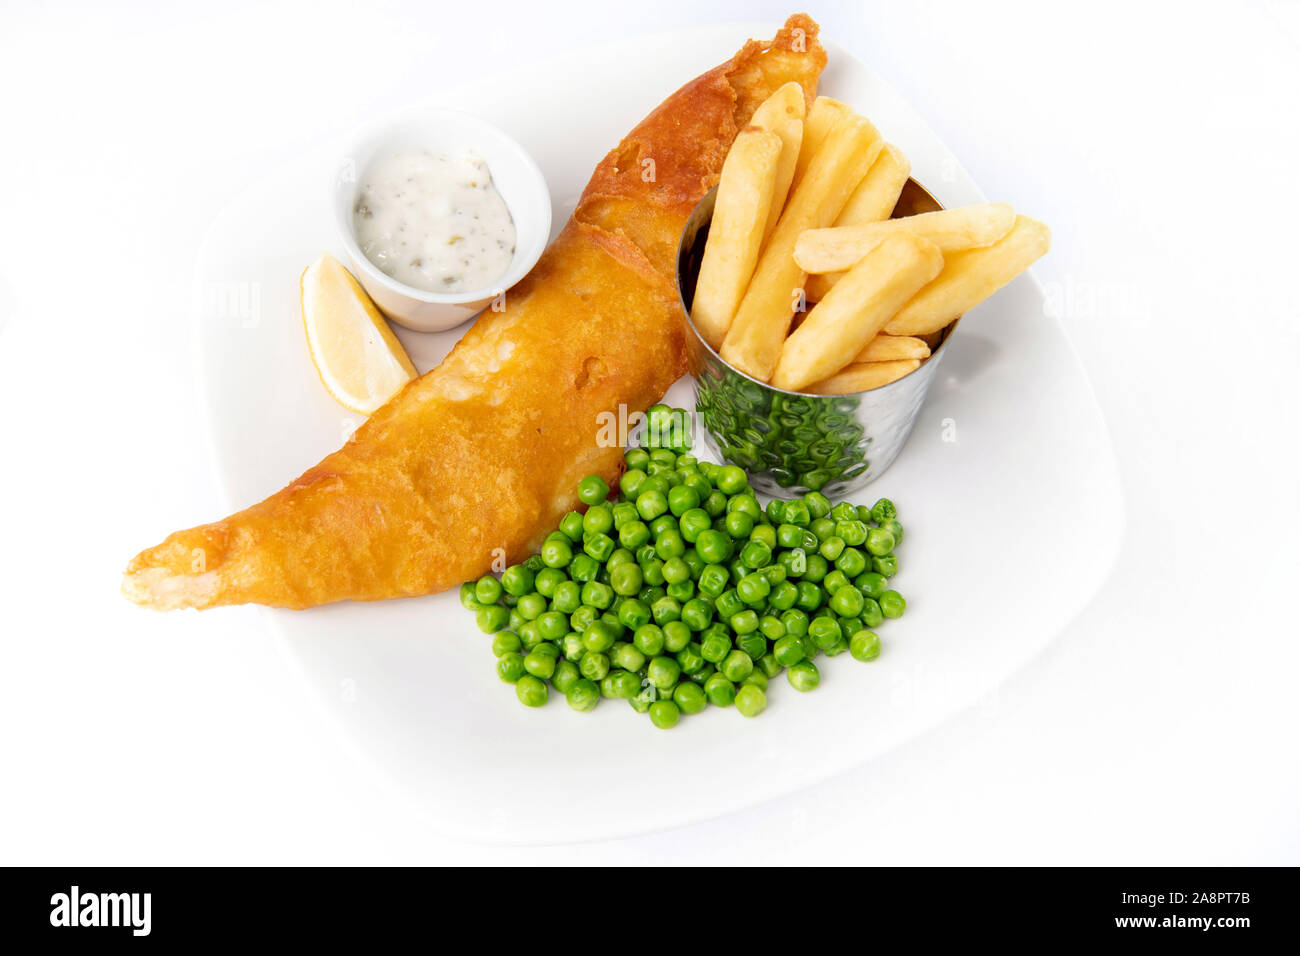 North Sea Ferries, Food Pictures, Aberdeen Stock Photo